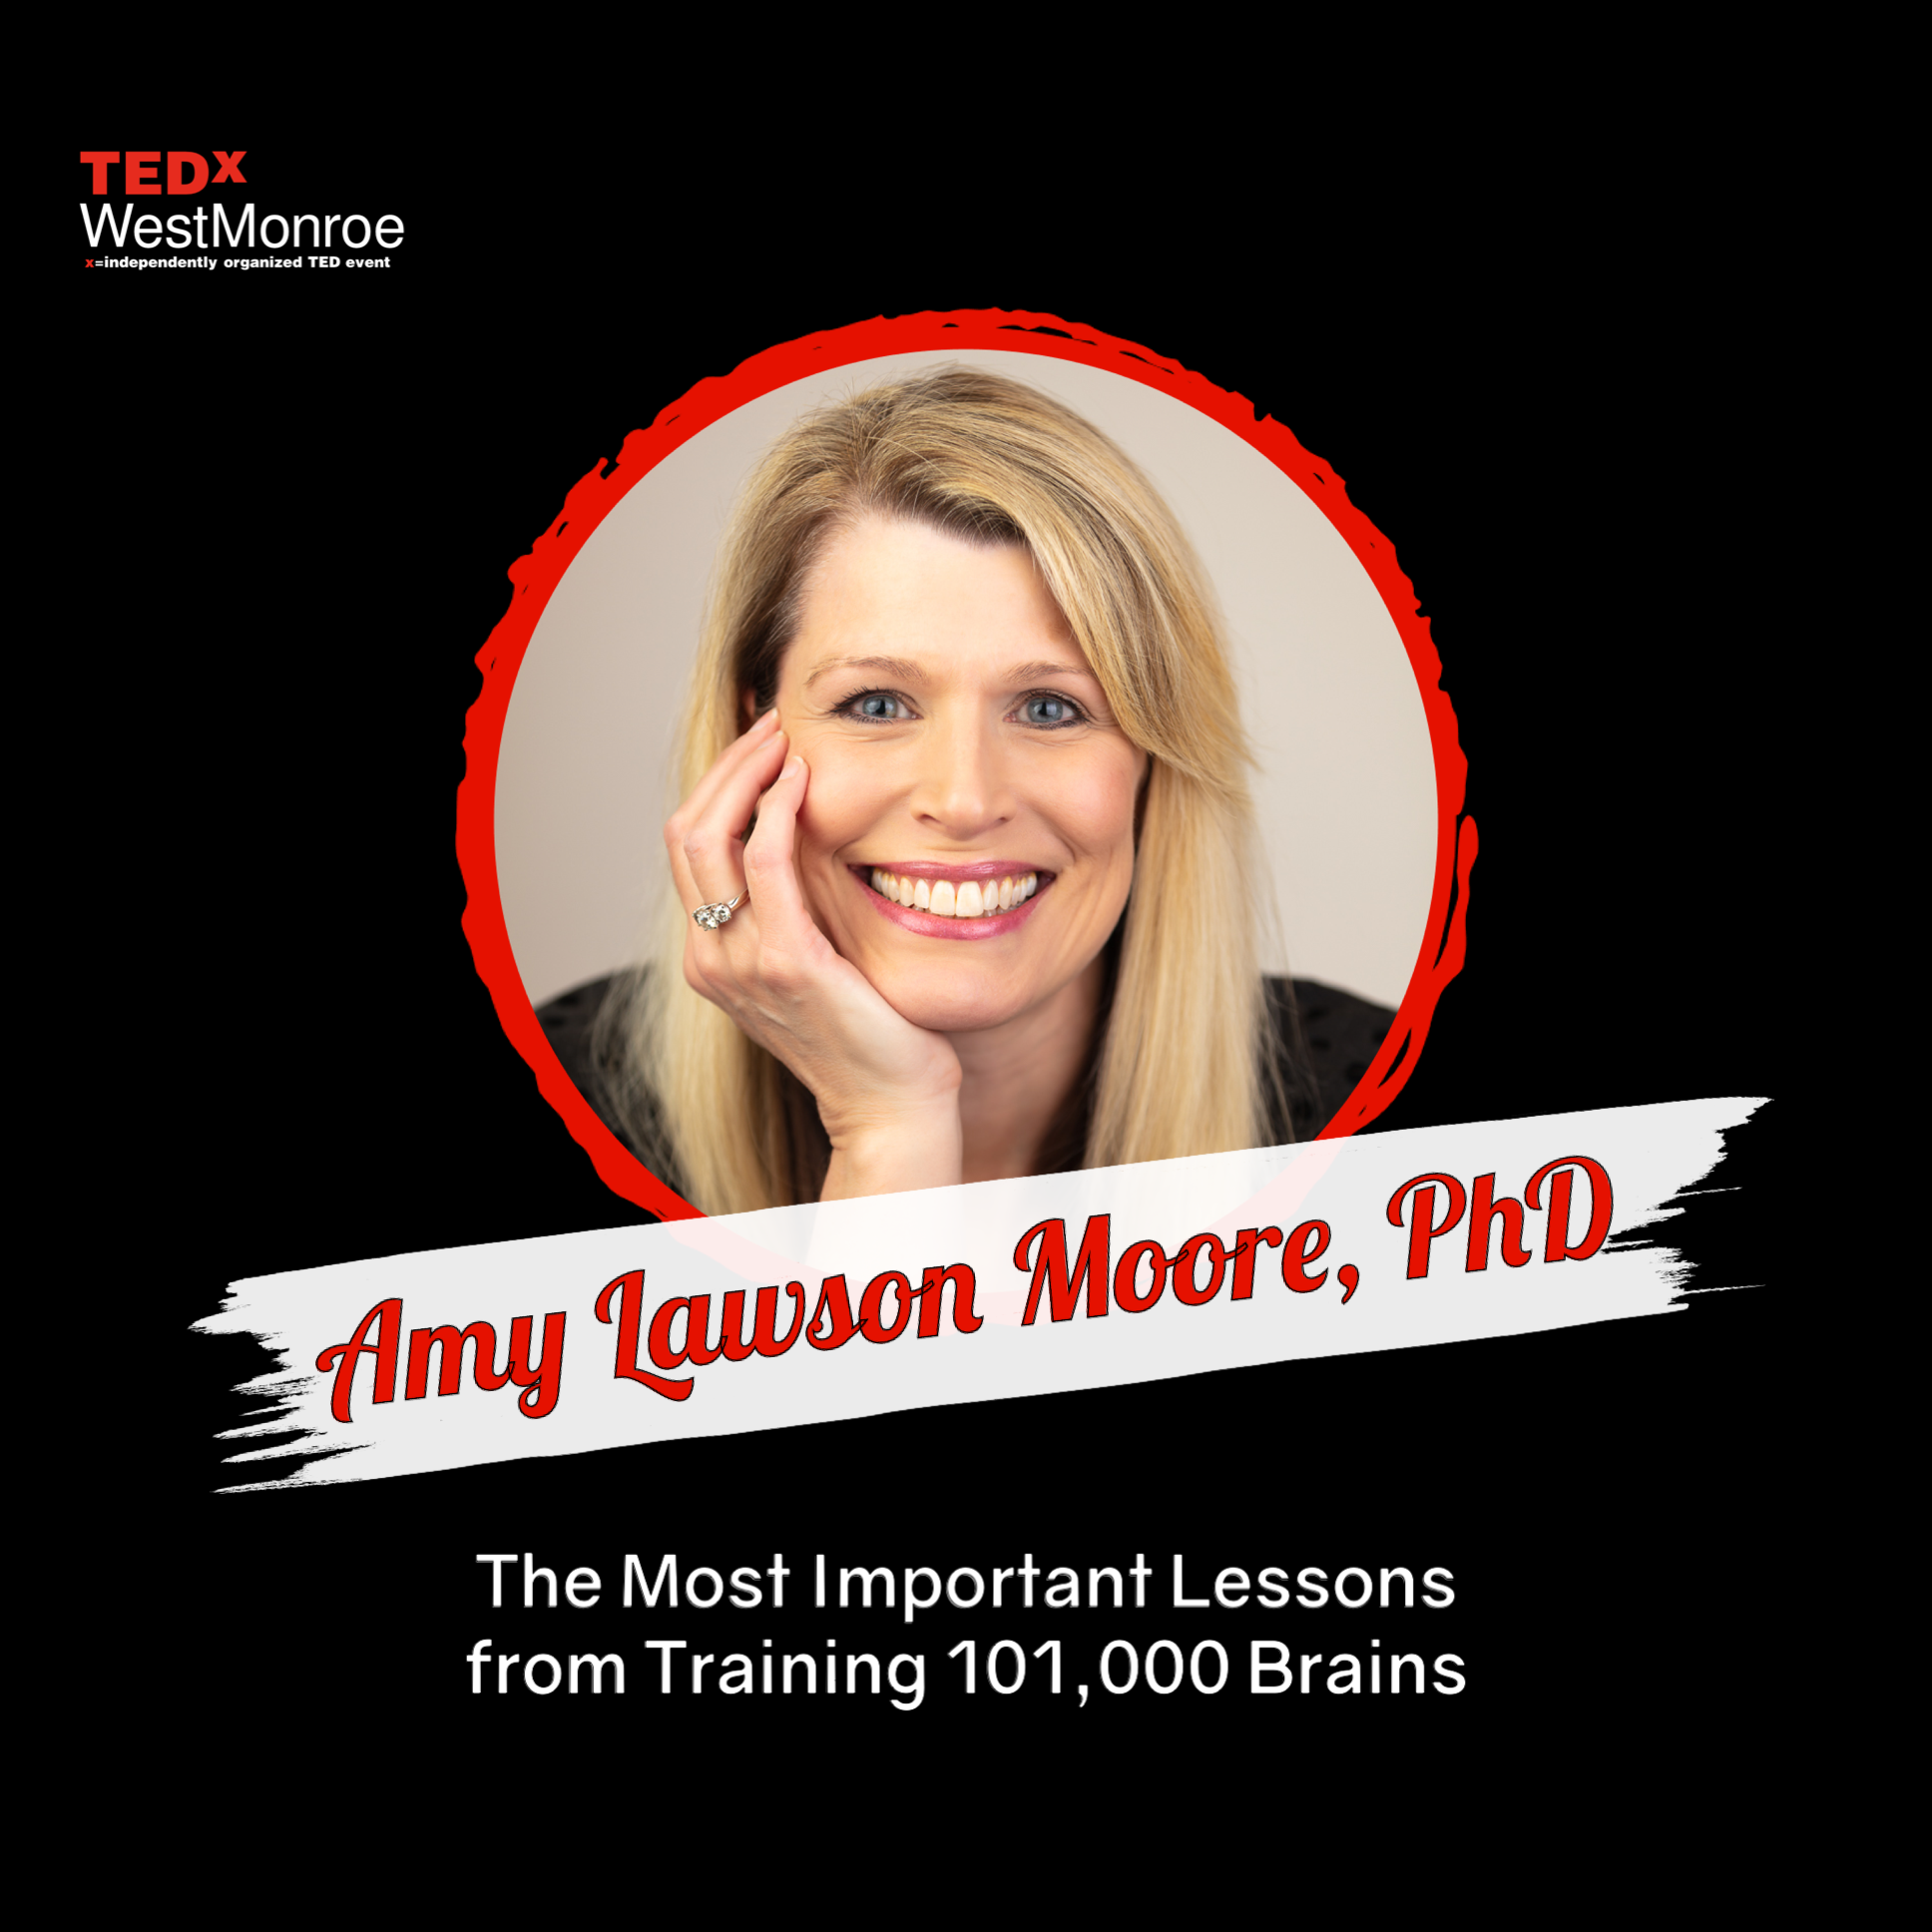 Lessons Learned from Training 101,000 Brains